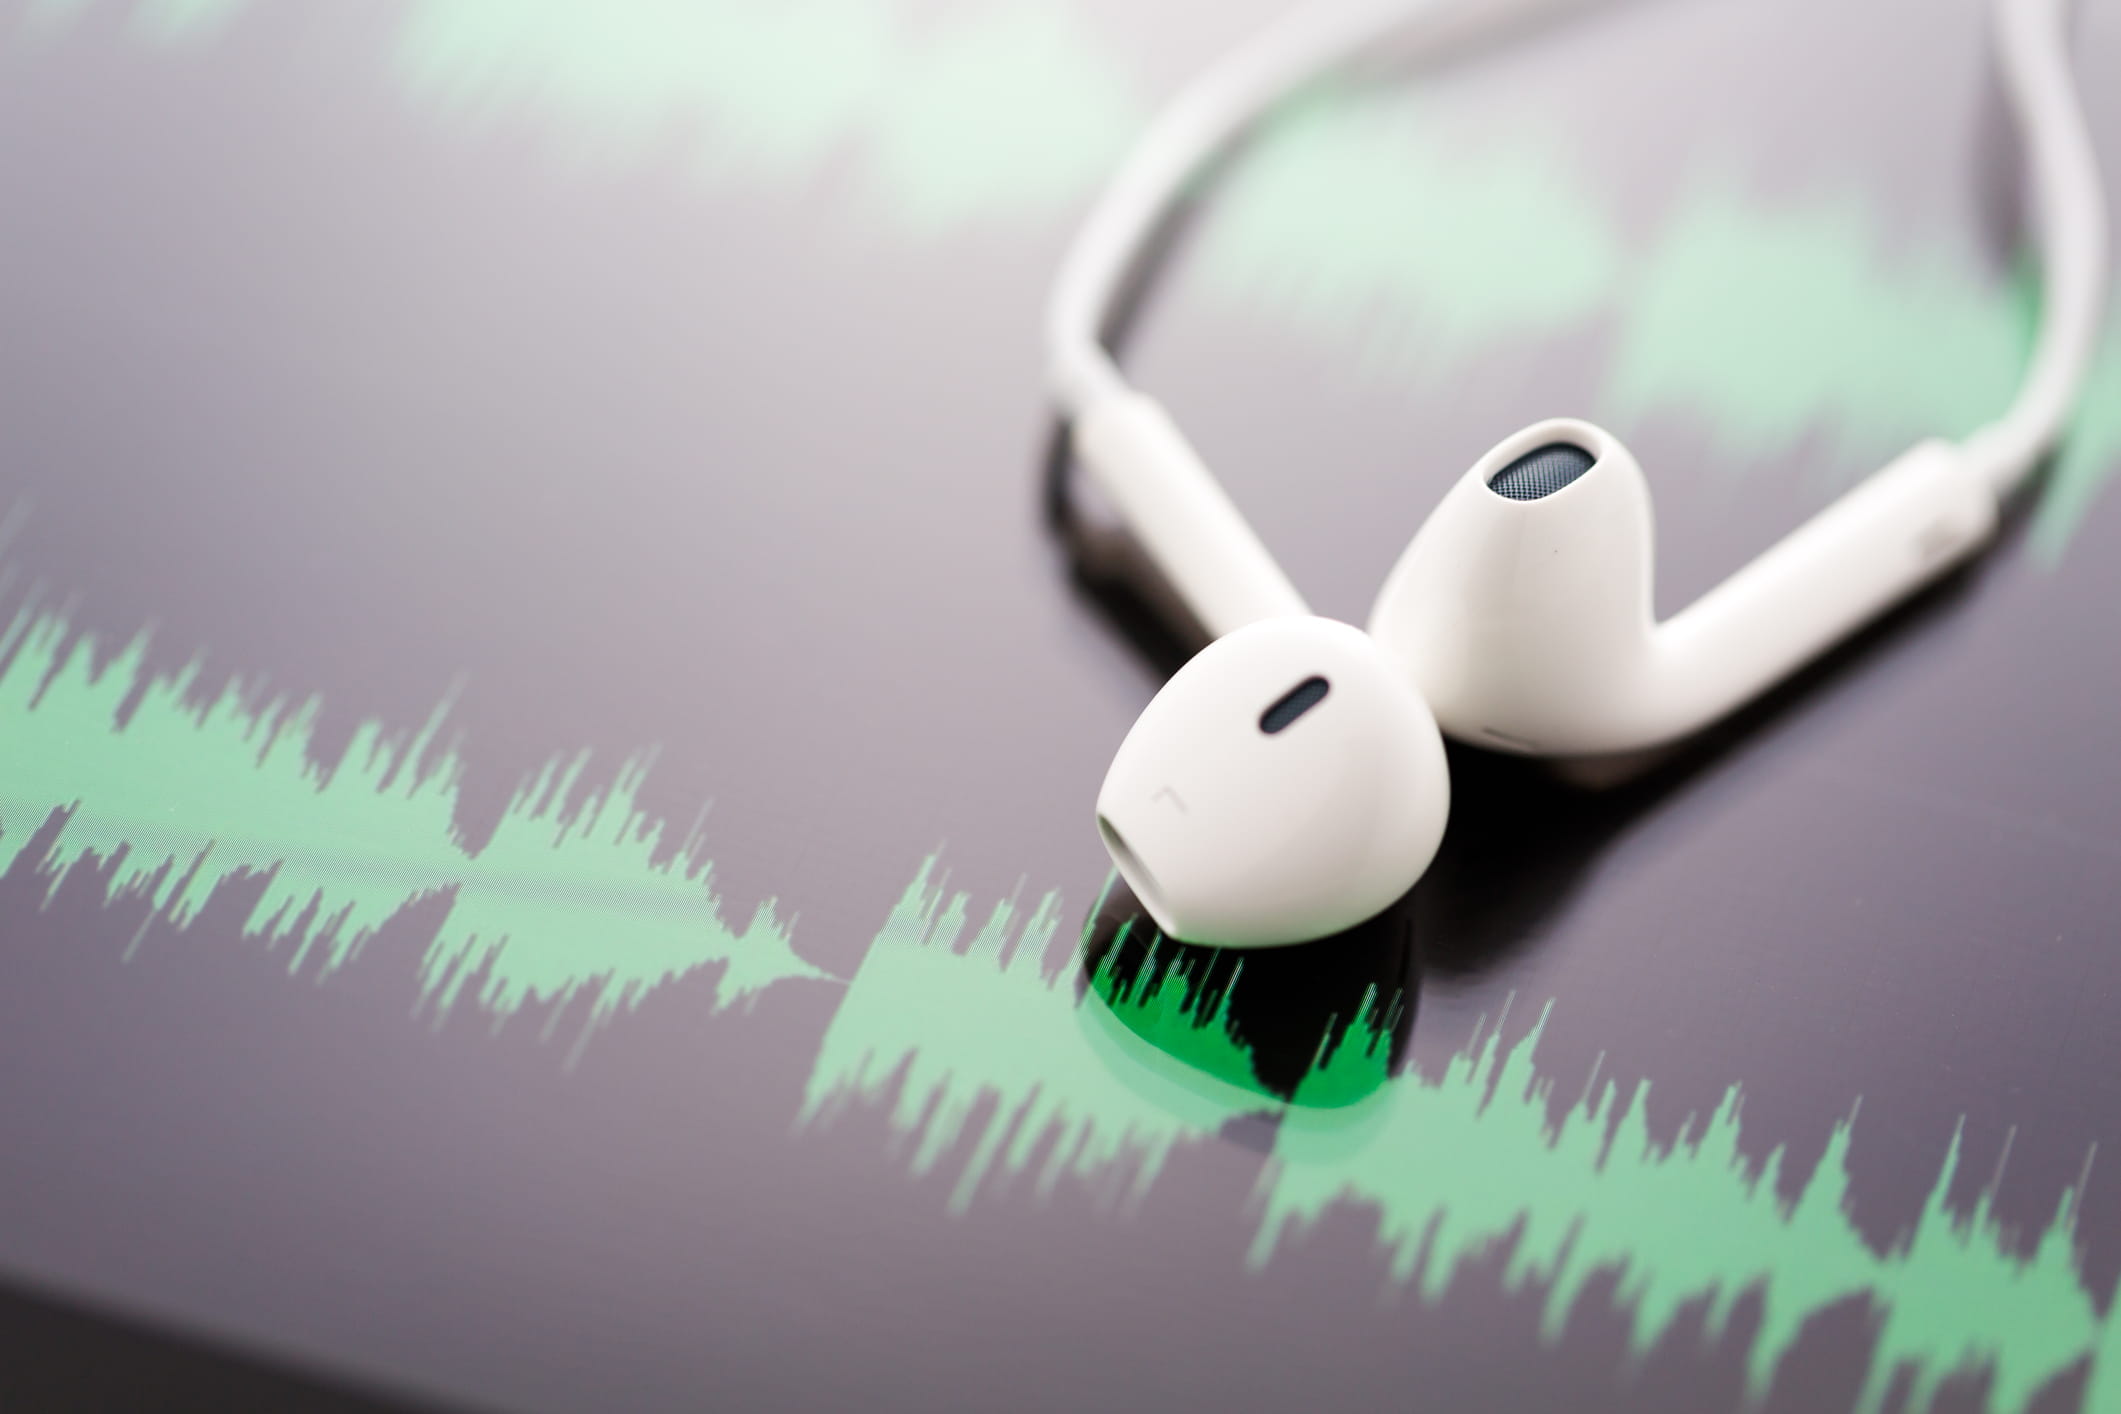 Earbuds over audio file image to represent a podcast